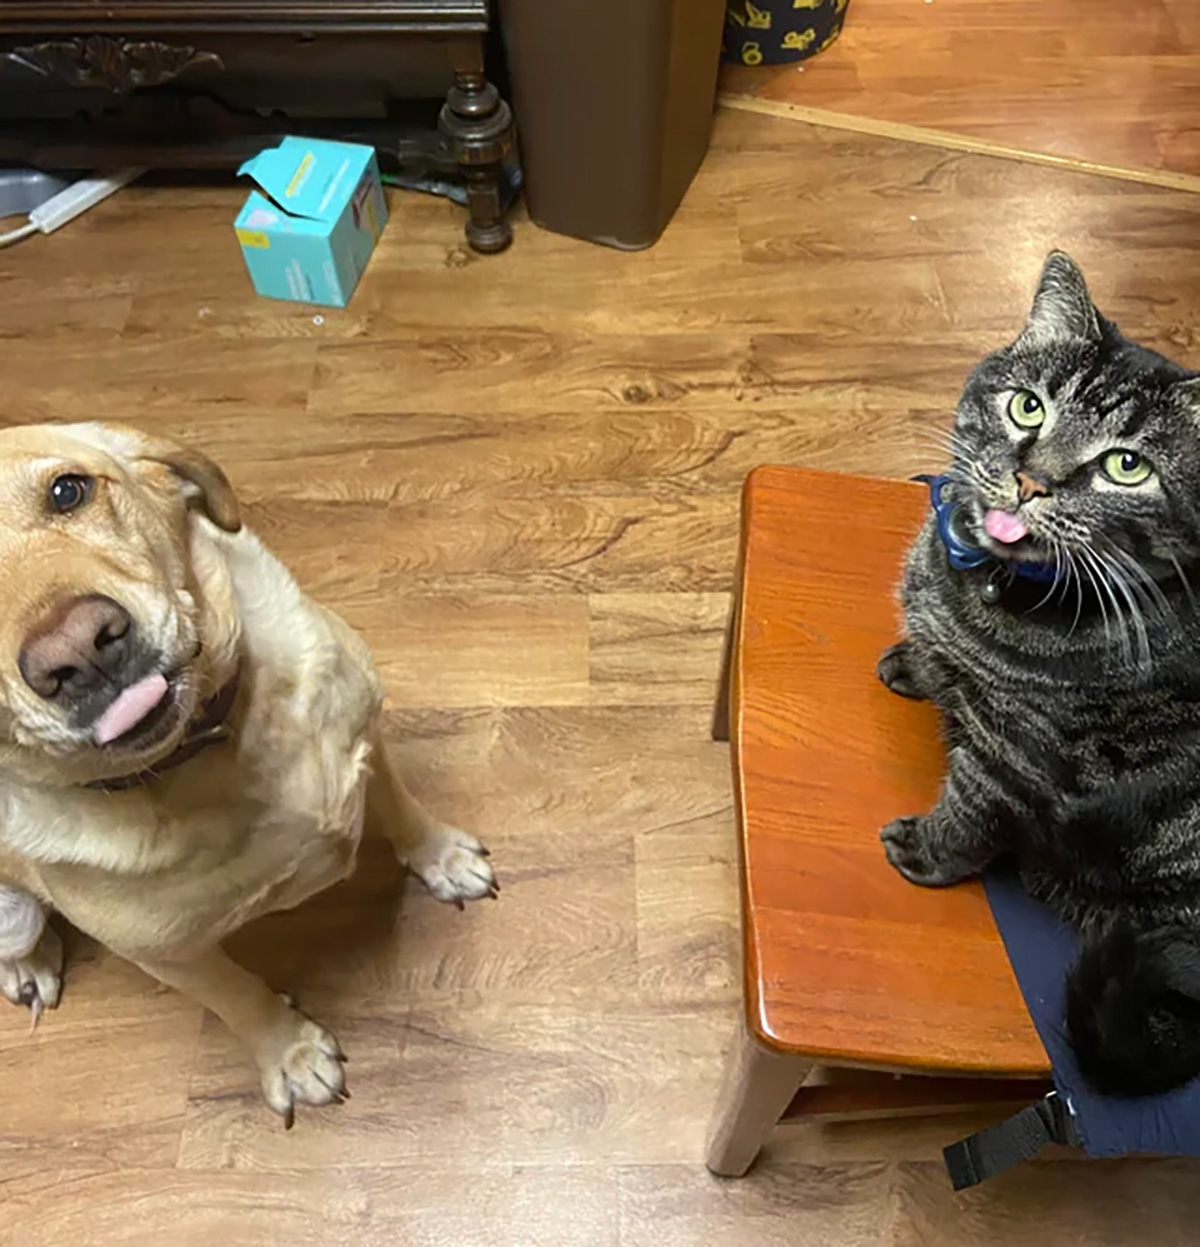 Incredible Moment Cat And Dog Strike Same Pose In Photo: 'Adorable Idiots'